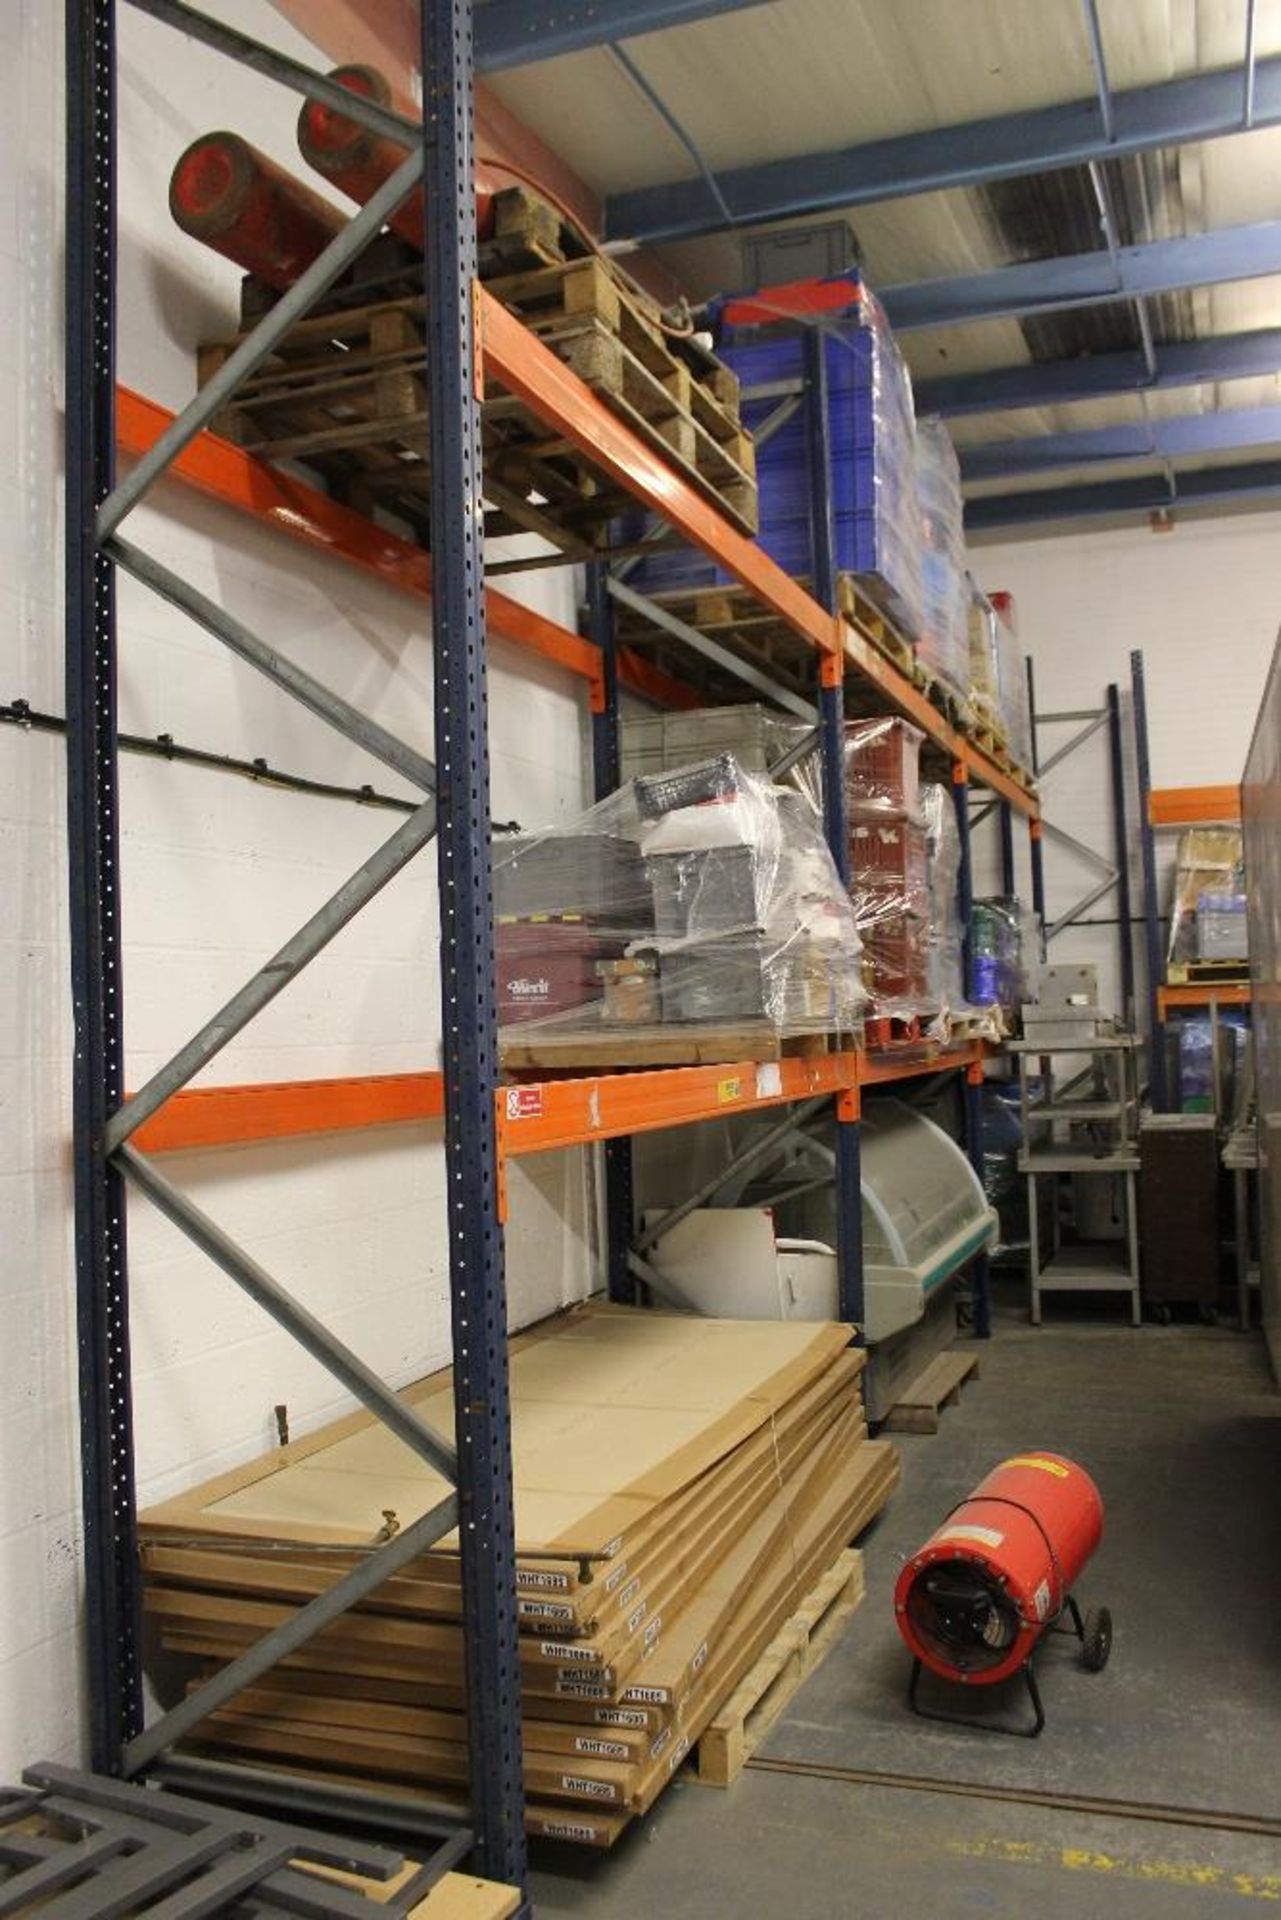 Two Bays Dexion Warehouse Racking – 8 Orange Cross Bars – 3 Blue Uprights - Must be collected Weds